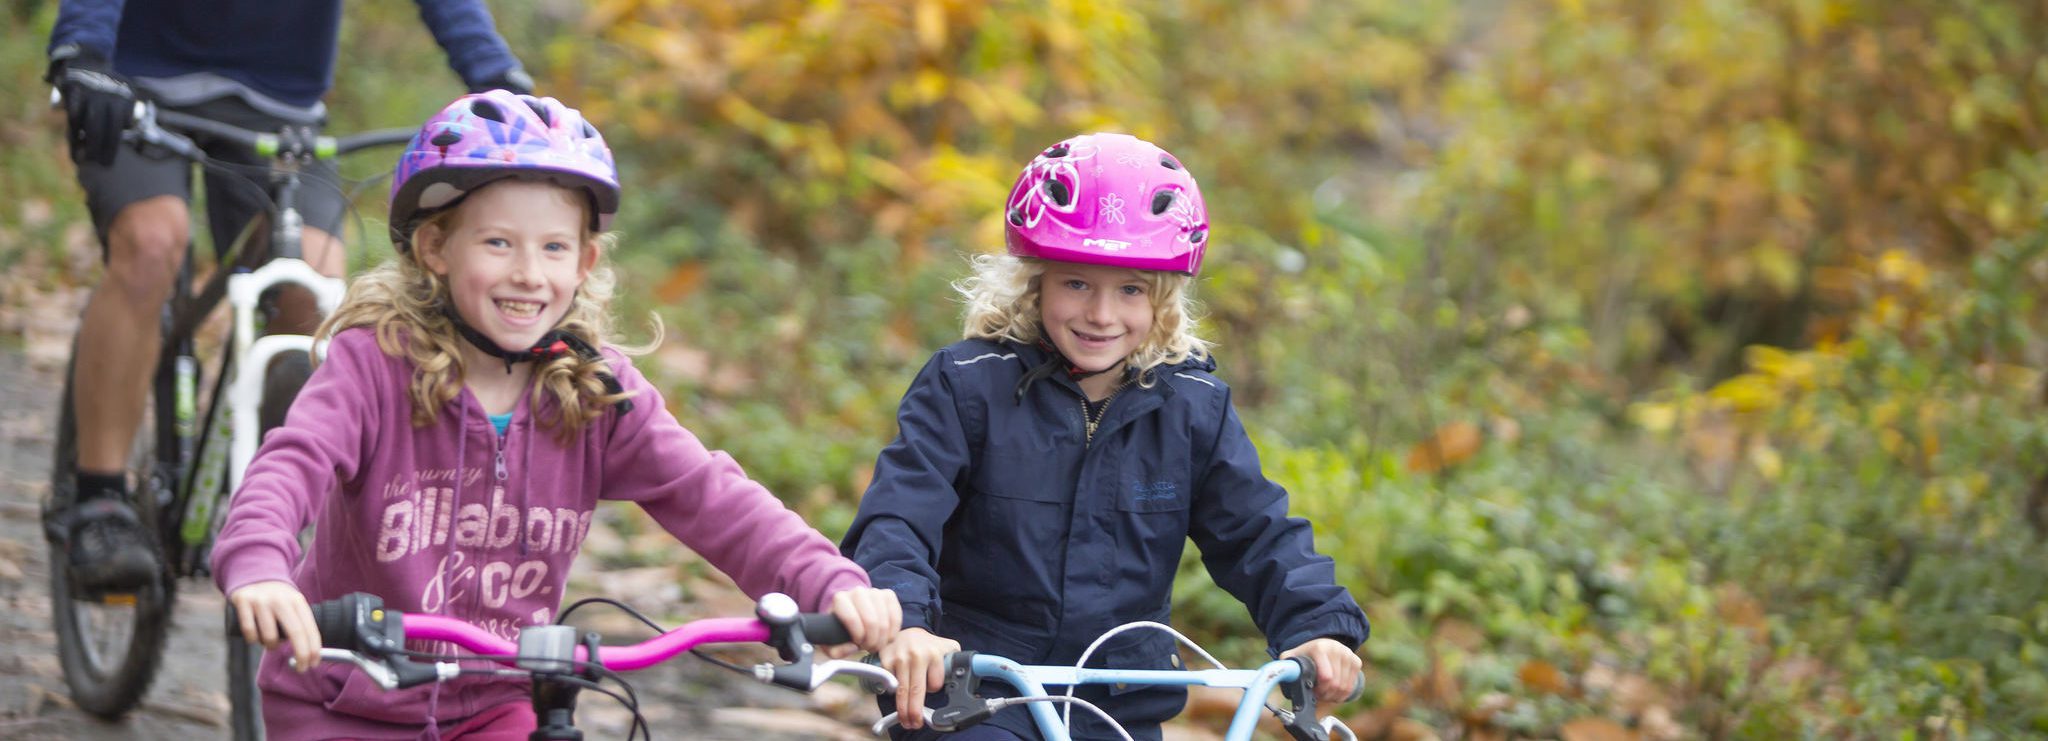 Family bike rides in Kent - Everyday Active Kent